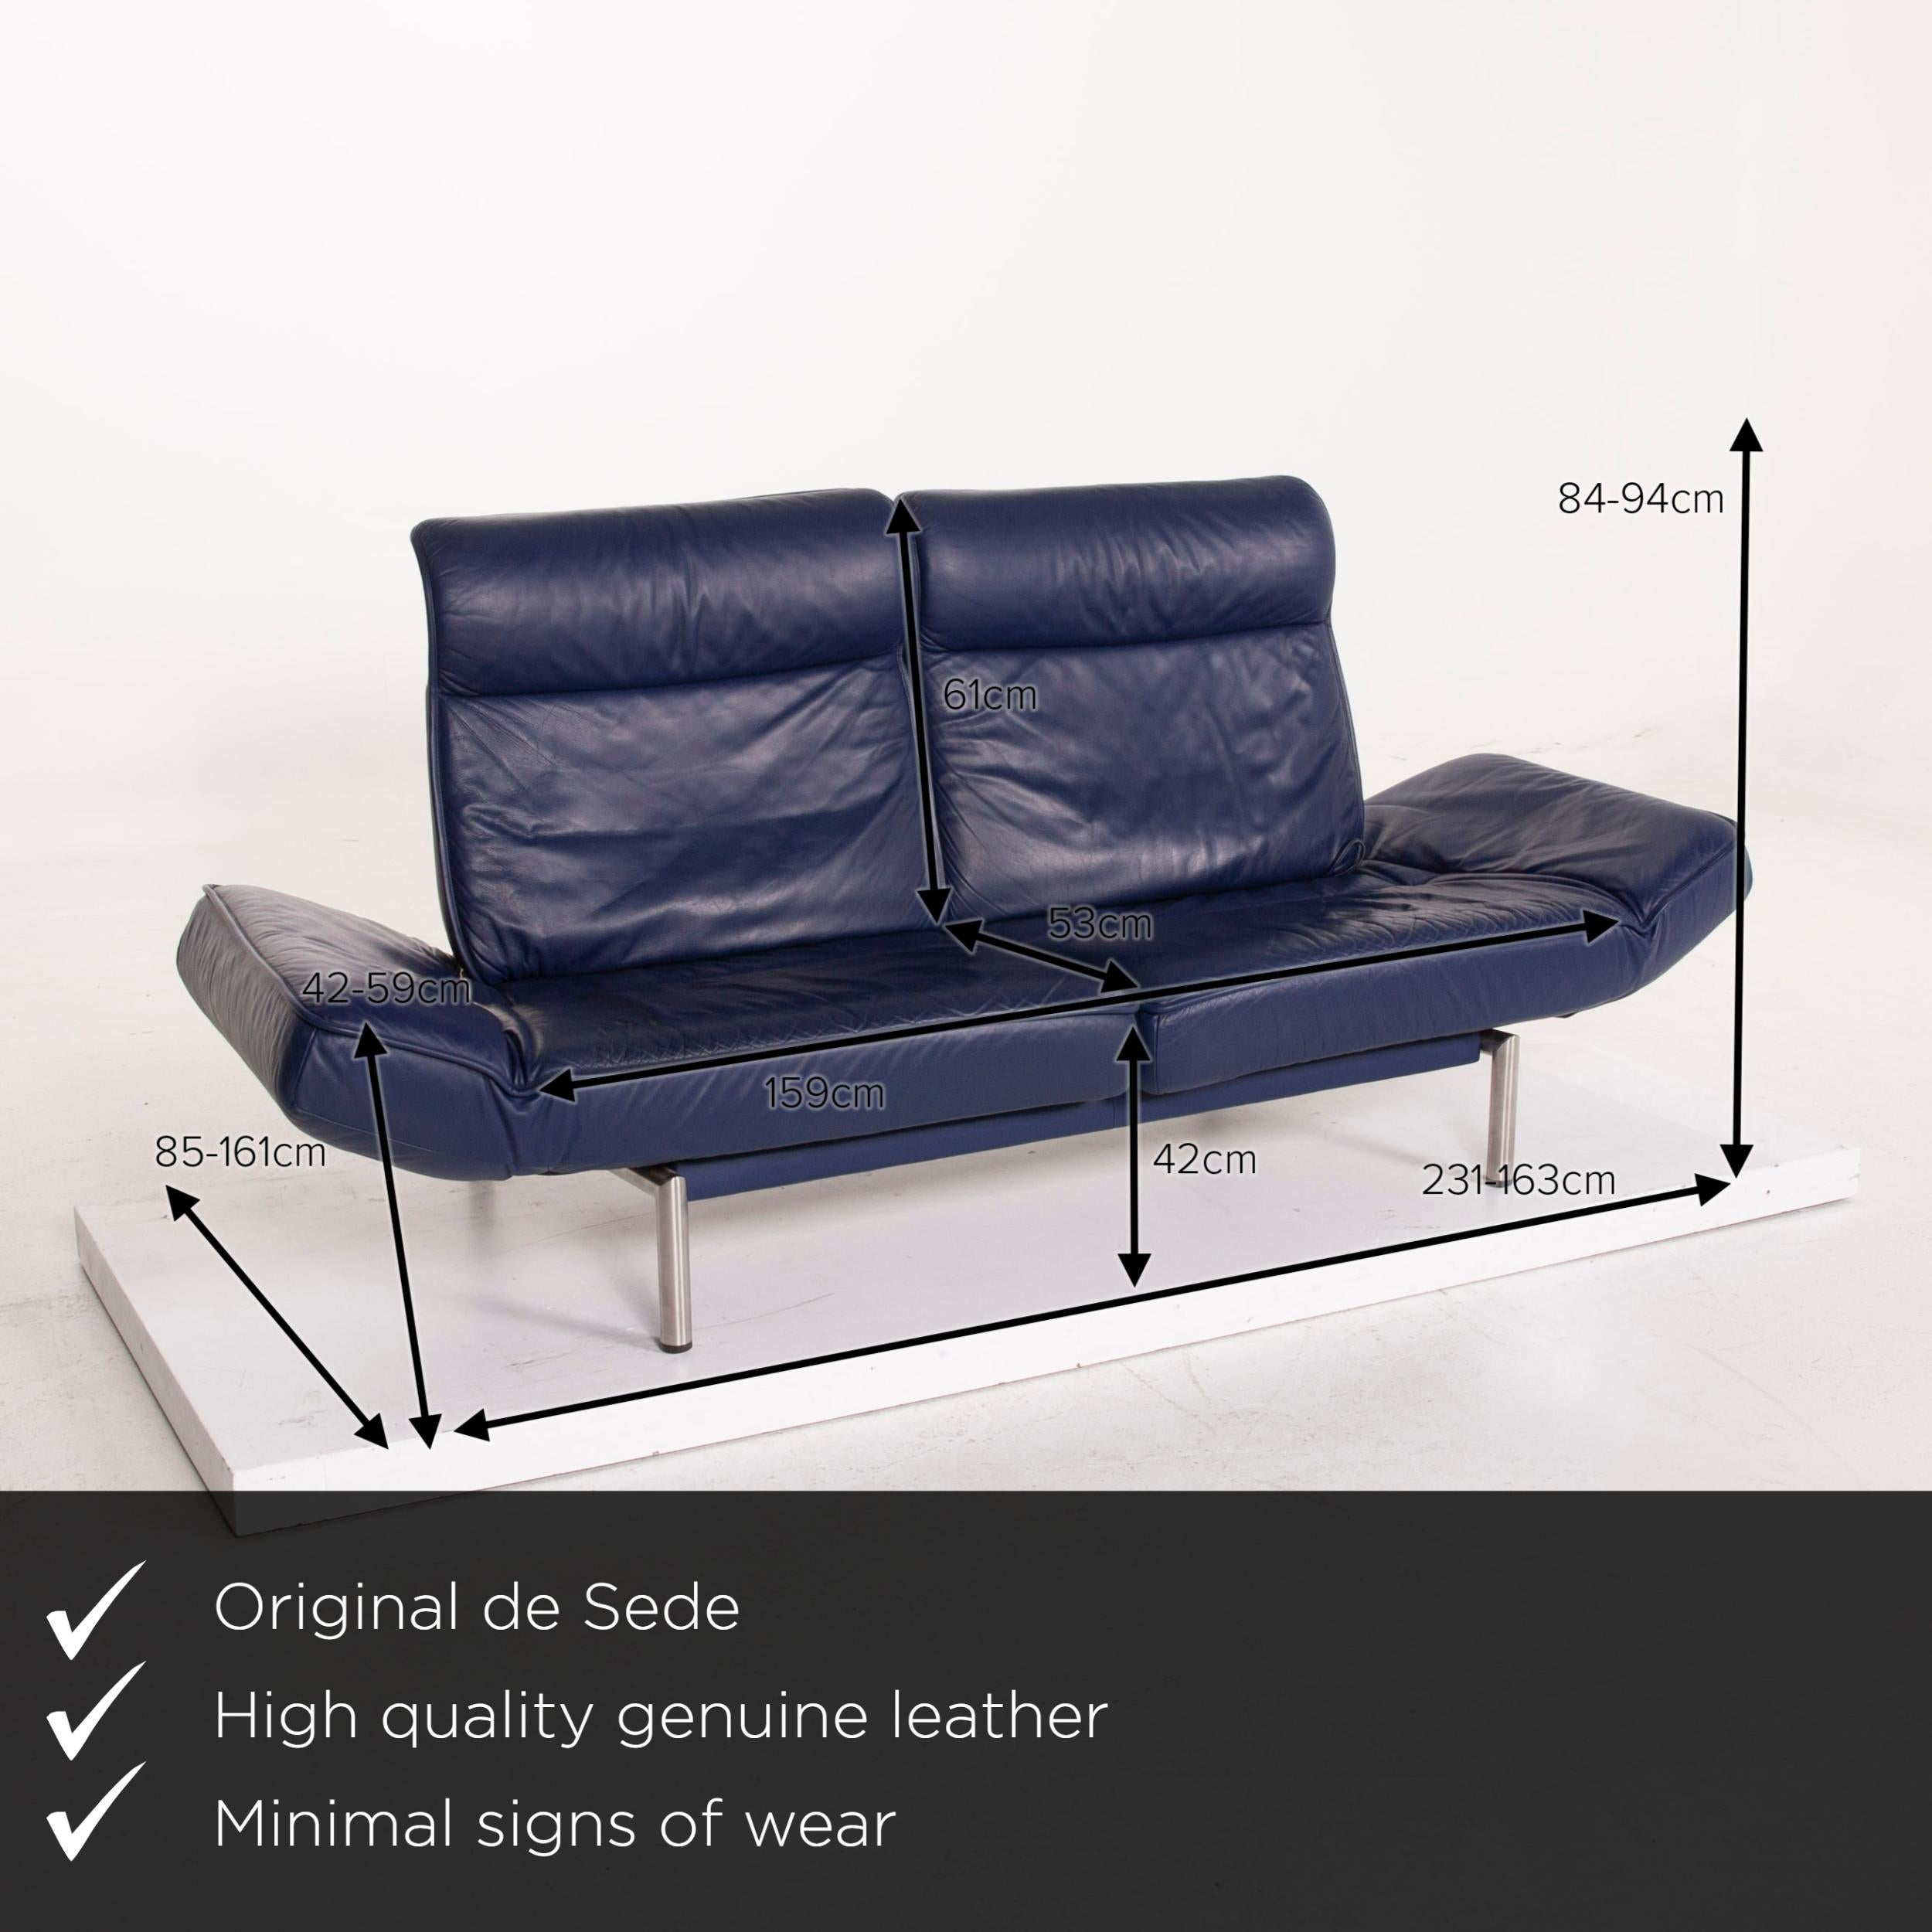 We present to you a De Sede ds 450 leather sofa blue two-seat function.

Product measurements in centimeters:

Depth 85
Width 231
Height 98
Seat height 42
Rest height 42
Seat depth 53
Seat width 159
Back height 61.
 
 
  